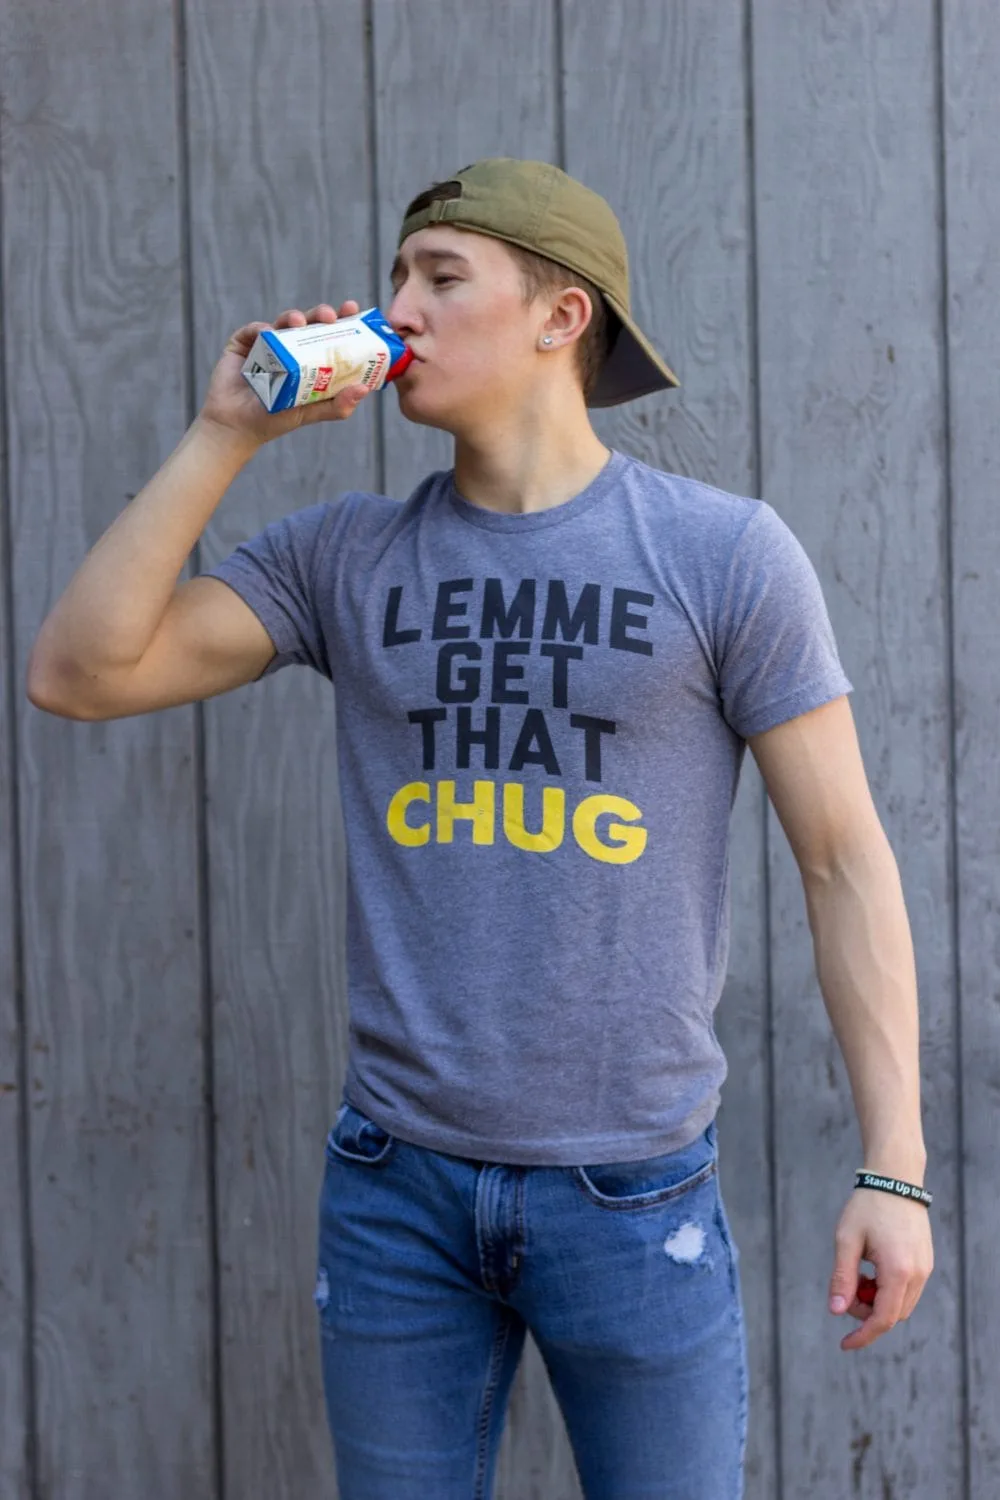 Teen drinking a protein drink in a "lemme get that chug" shirt. 